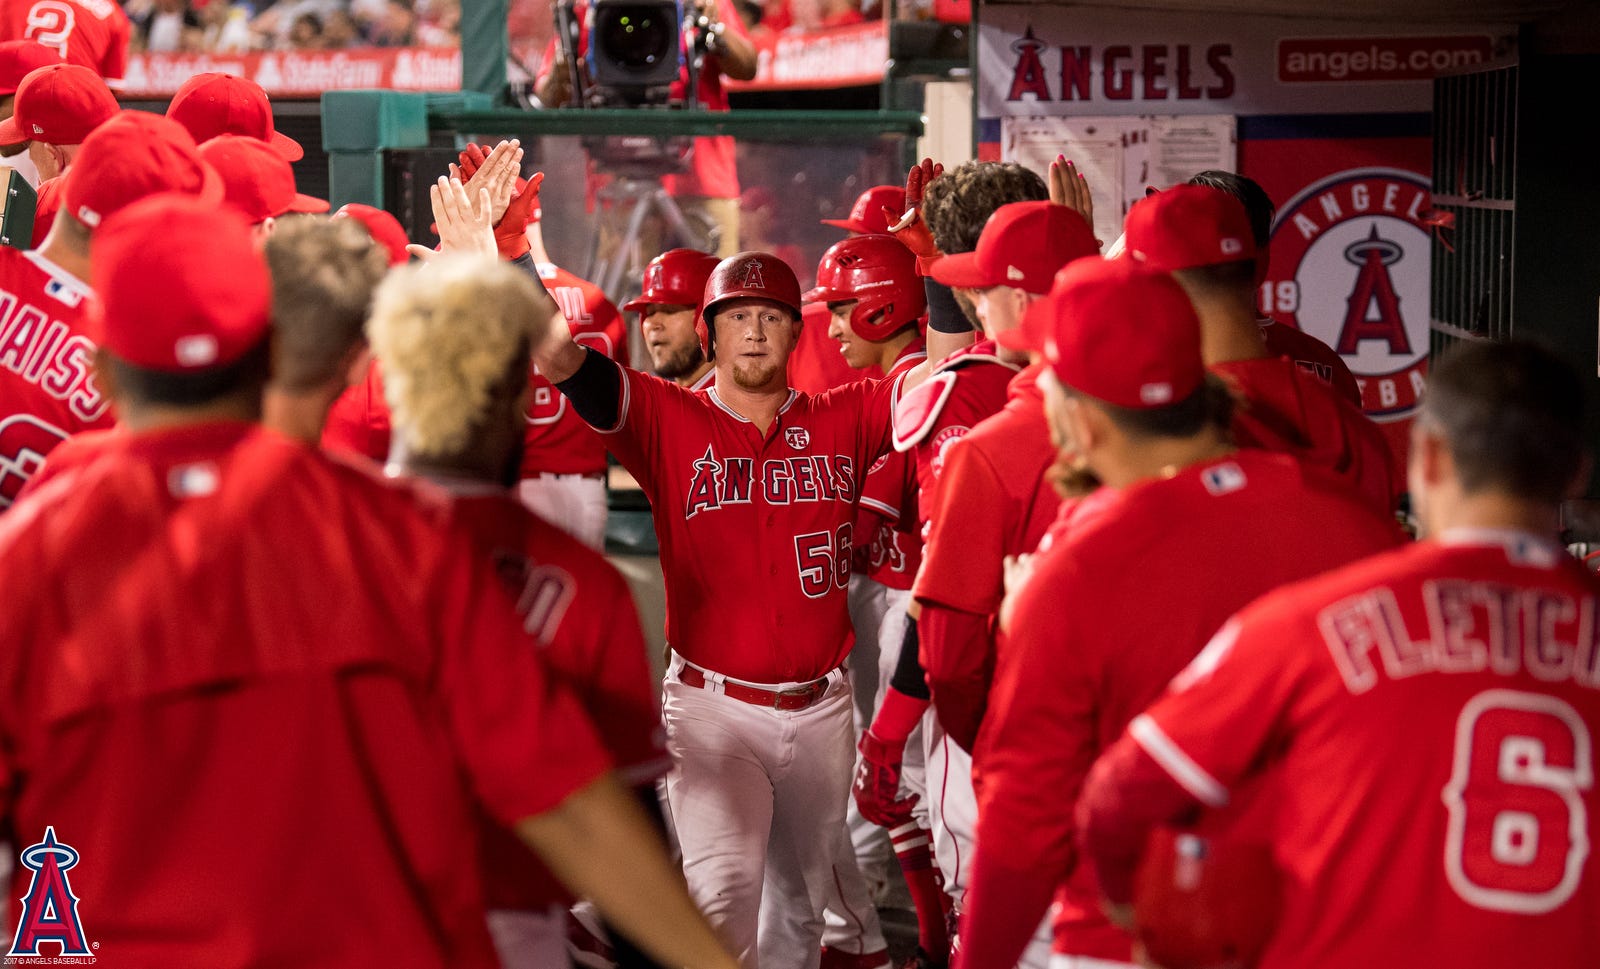 Anaheim Ducks] The Angels had a Ducks night at the Angels game